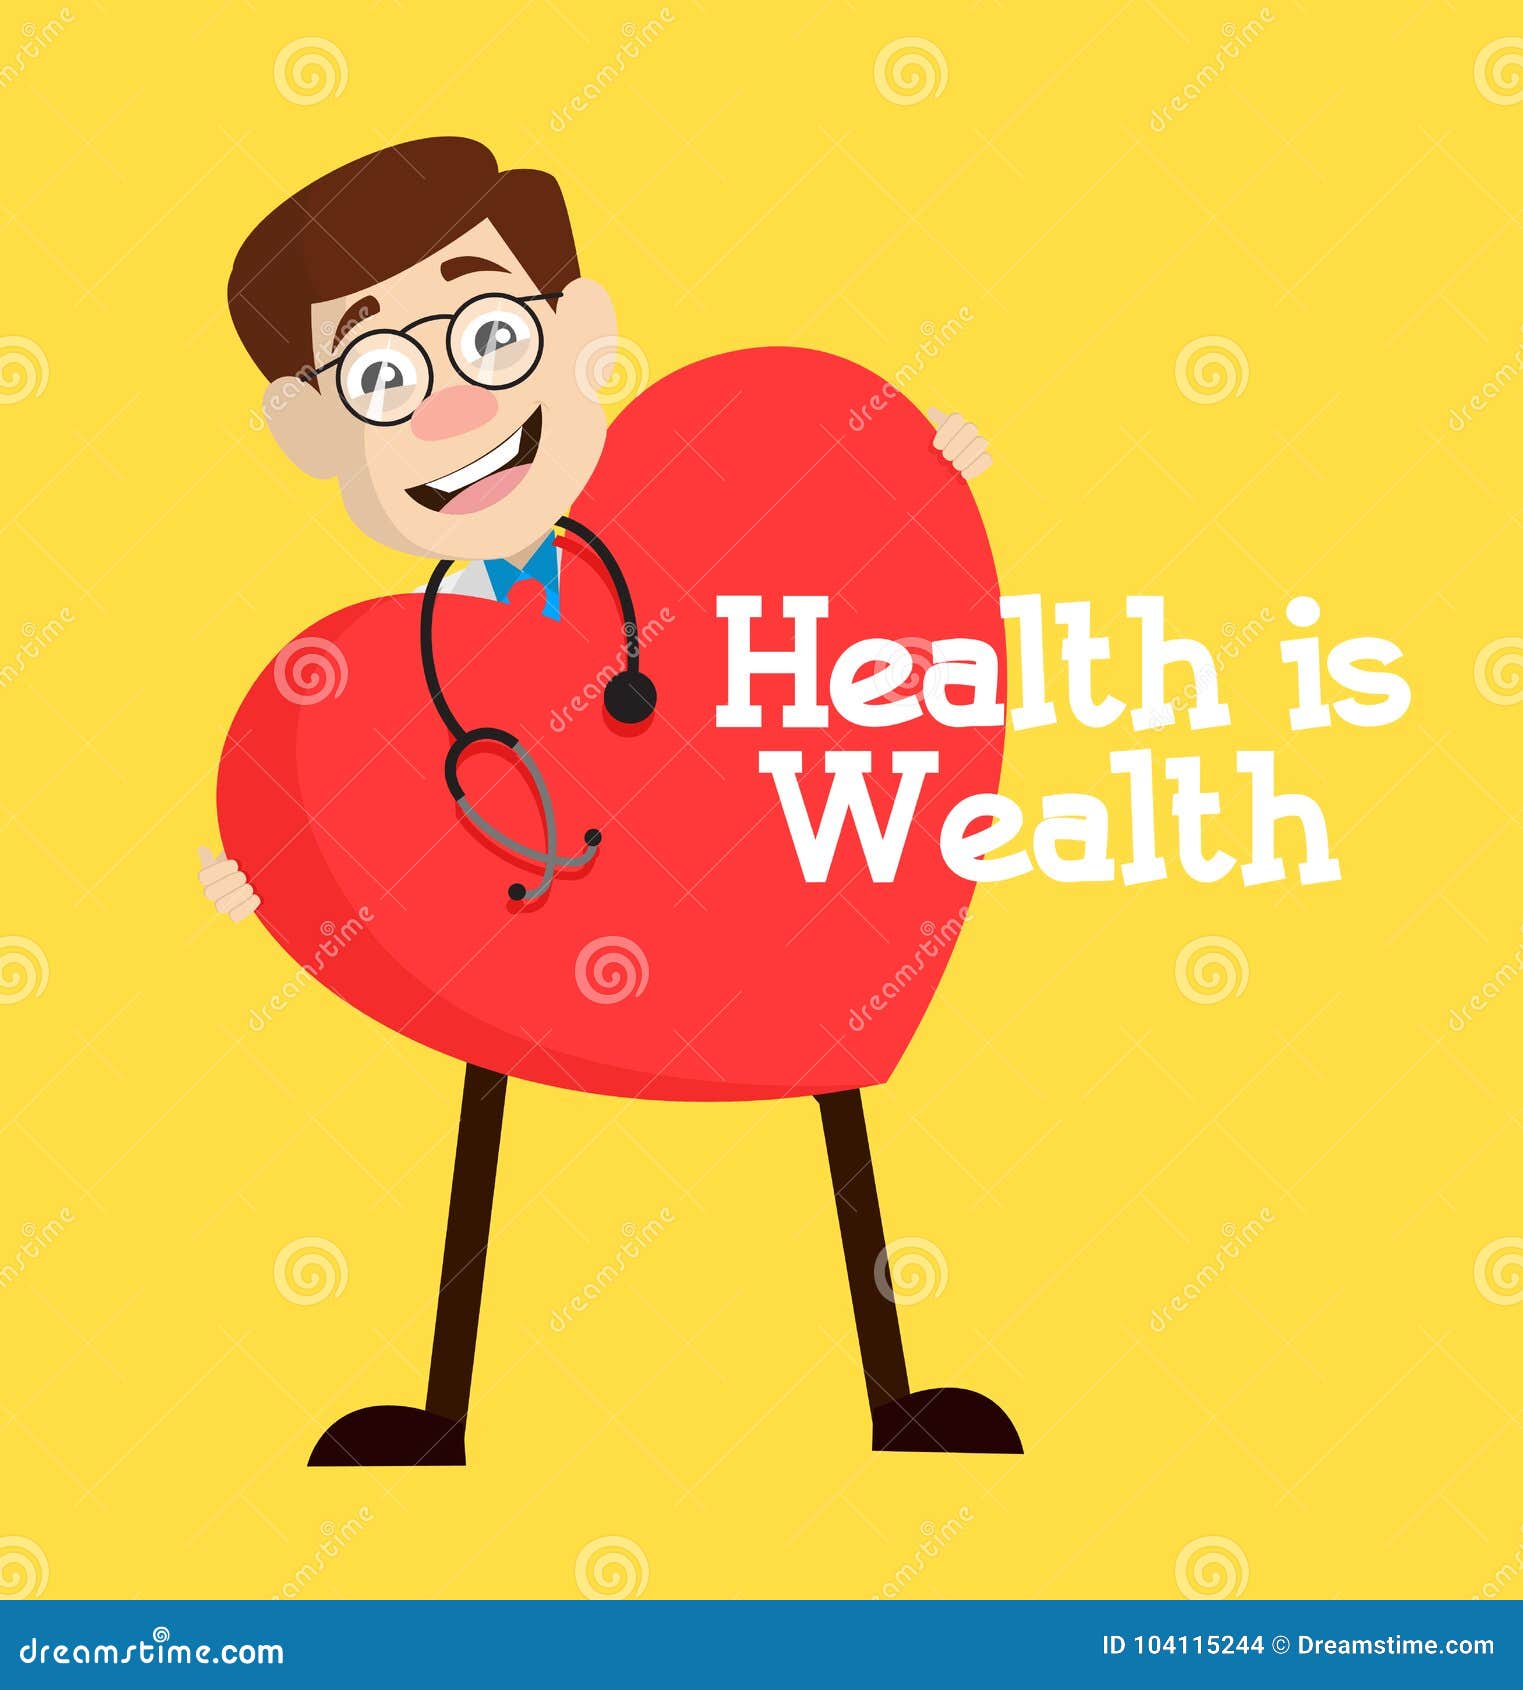 Image result for wealth and health cartoon